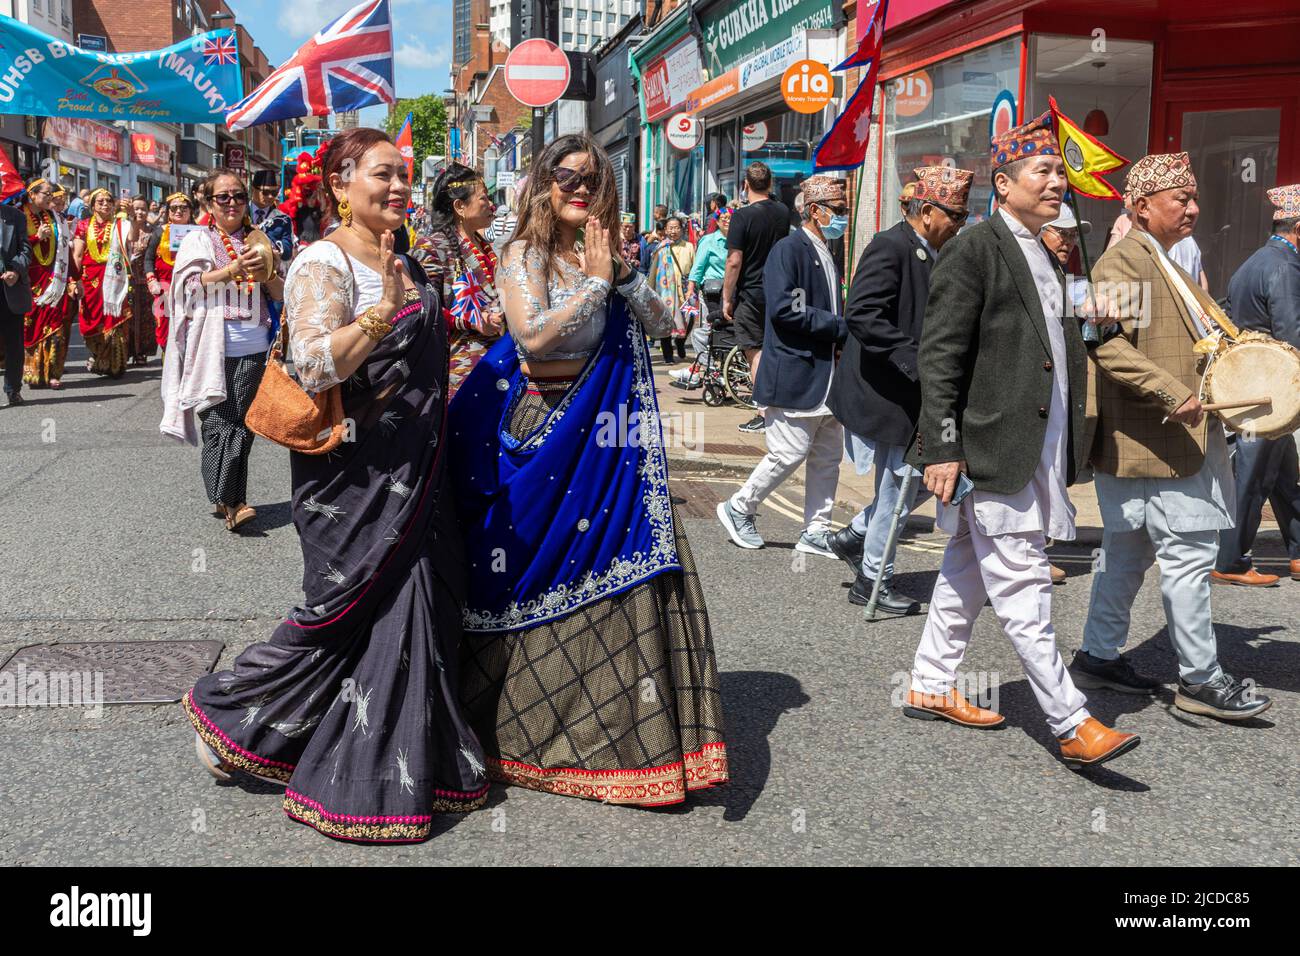 Nepali people, The Magar ethnic group, in the Grand Parade at Victoria Day, an annual event in Aldershot, Hampshire, England, UK Stock Photo